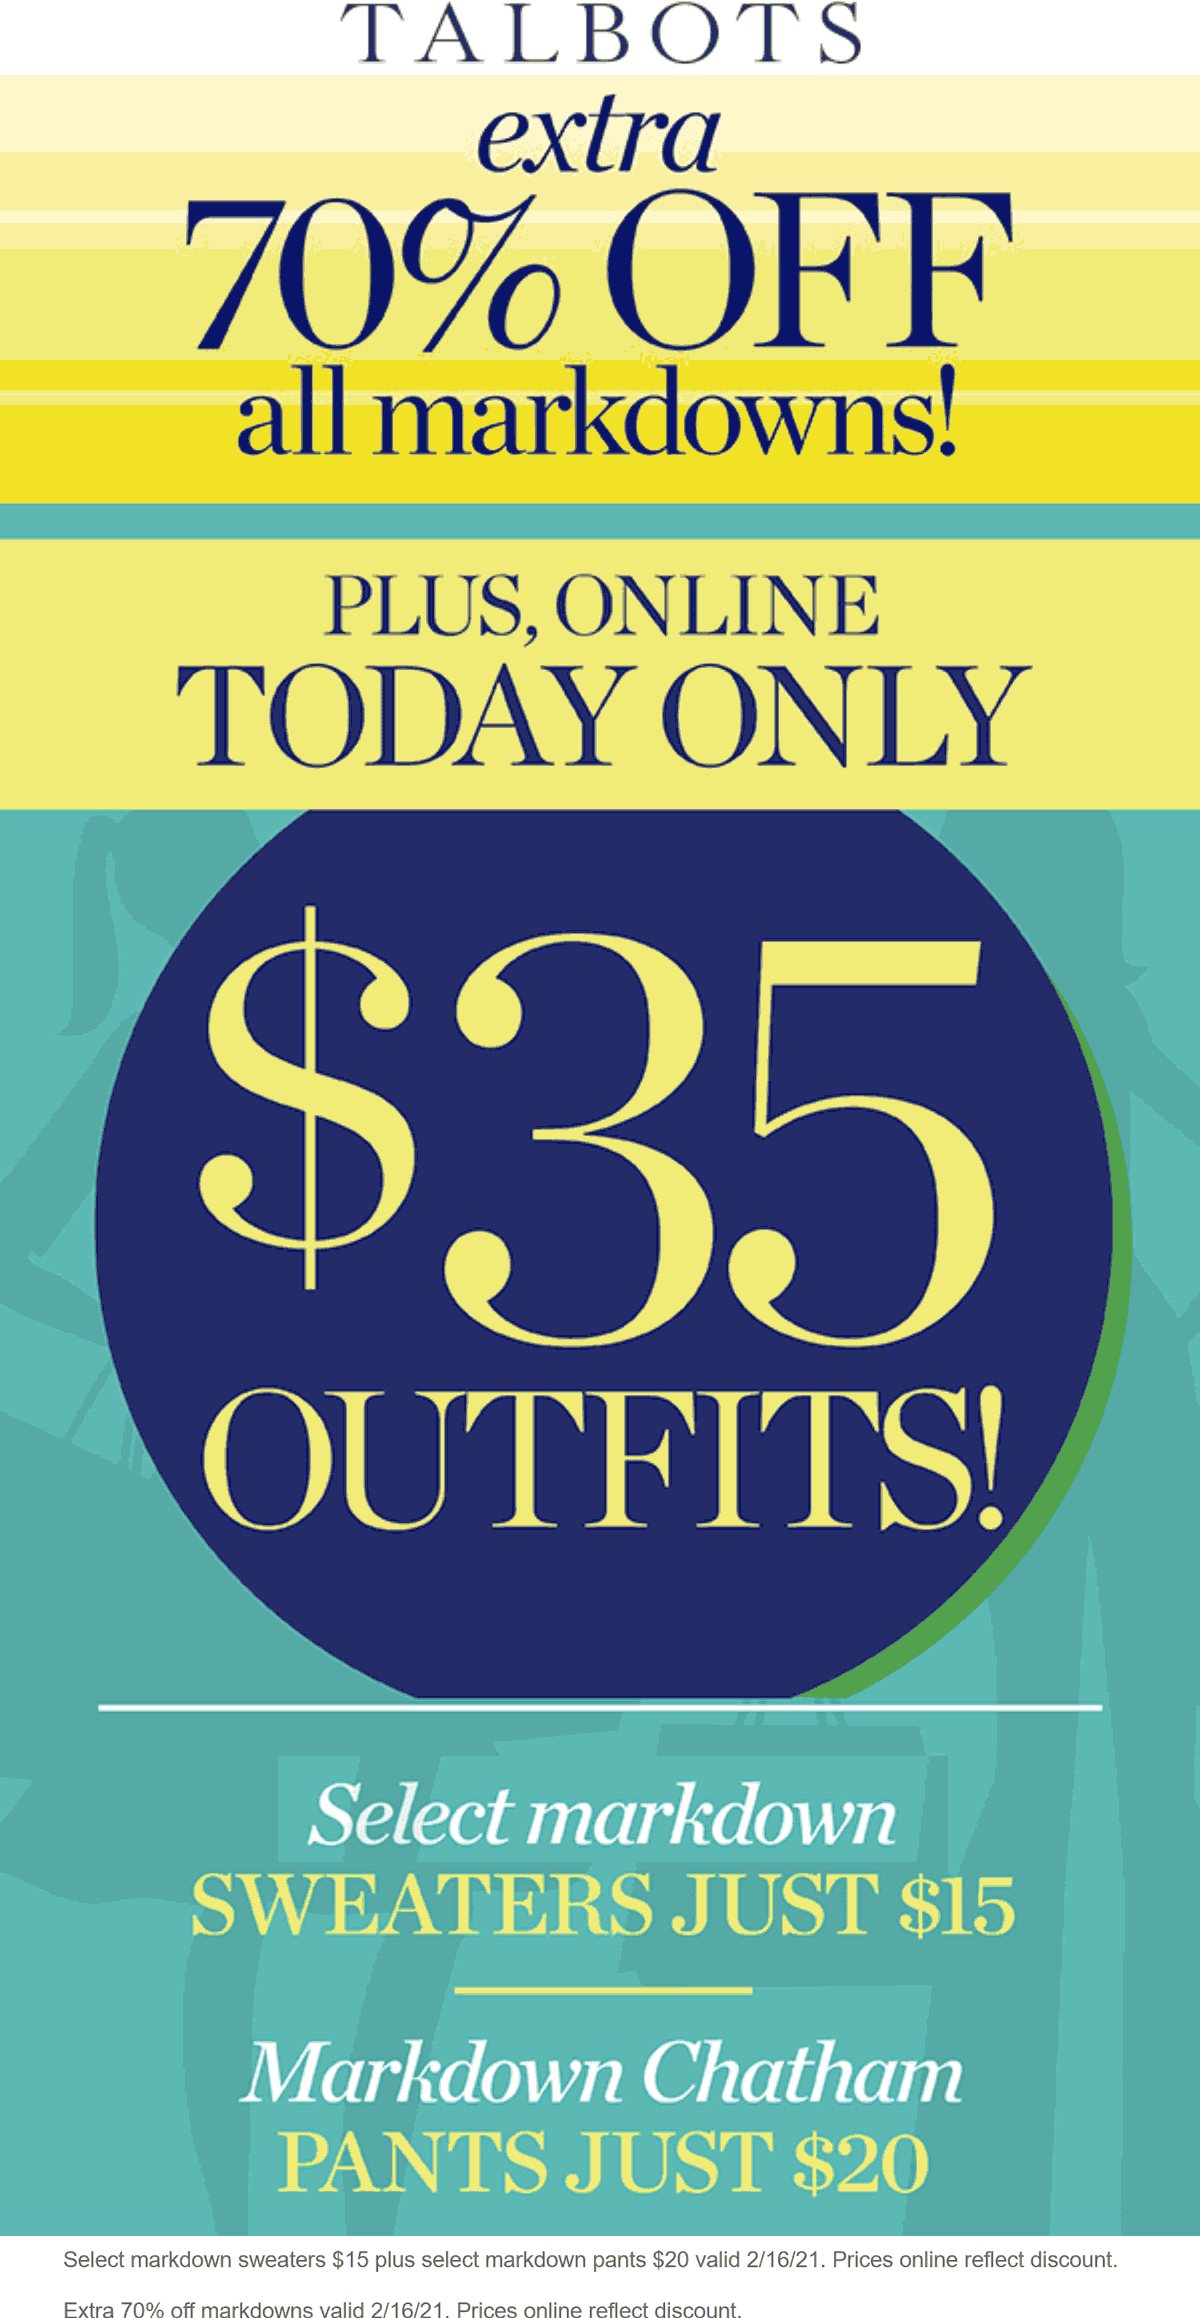 Talbots stores Coupon  Extra 70% off markdowns today at Talbots, ditto online #talbots 